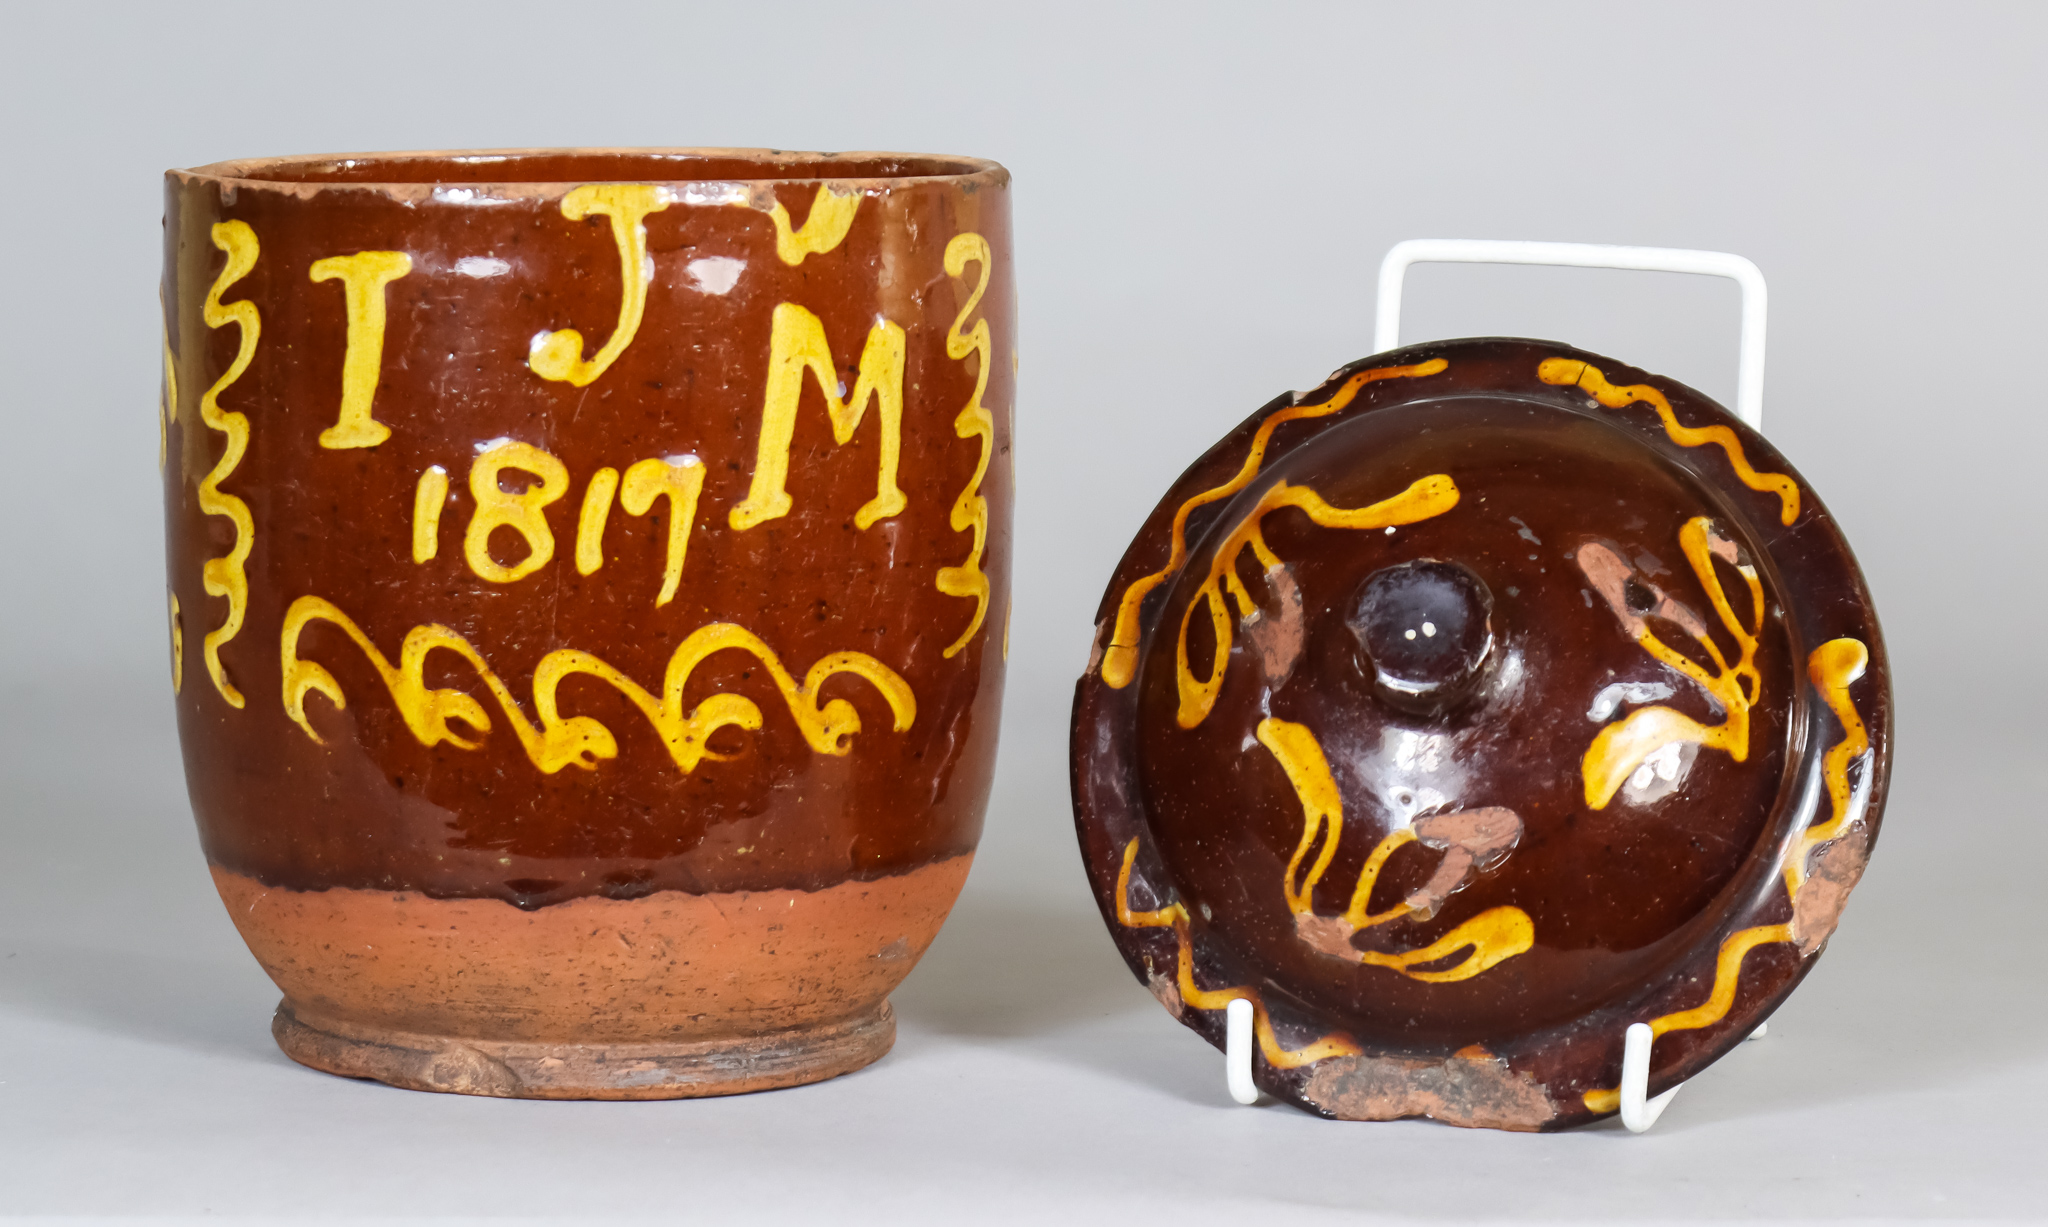 An English Dated Slip Ware Pot and a Cover, slip trailed with the initials "IJM" and dated 1817